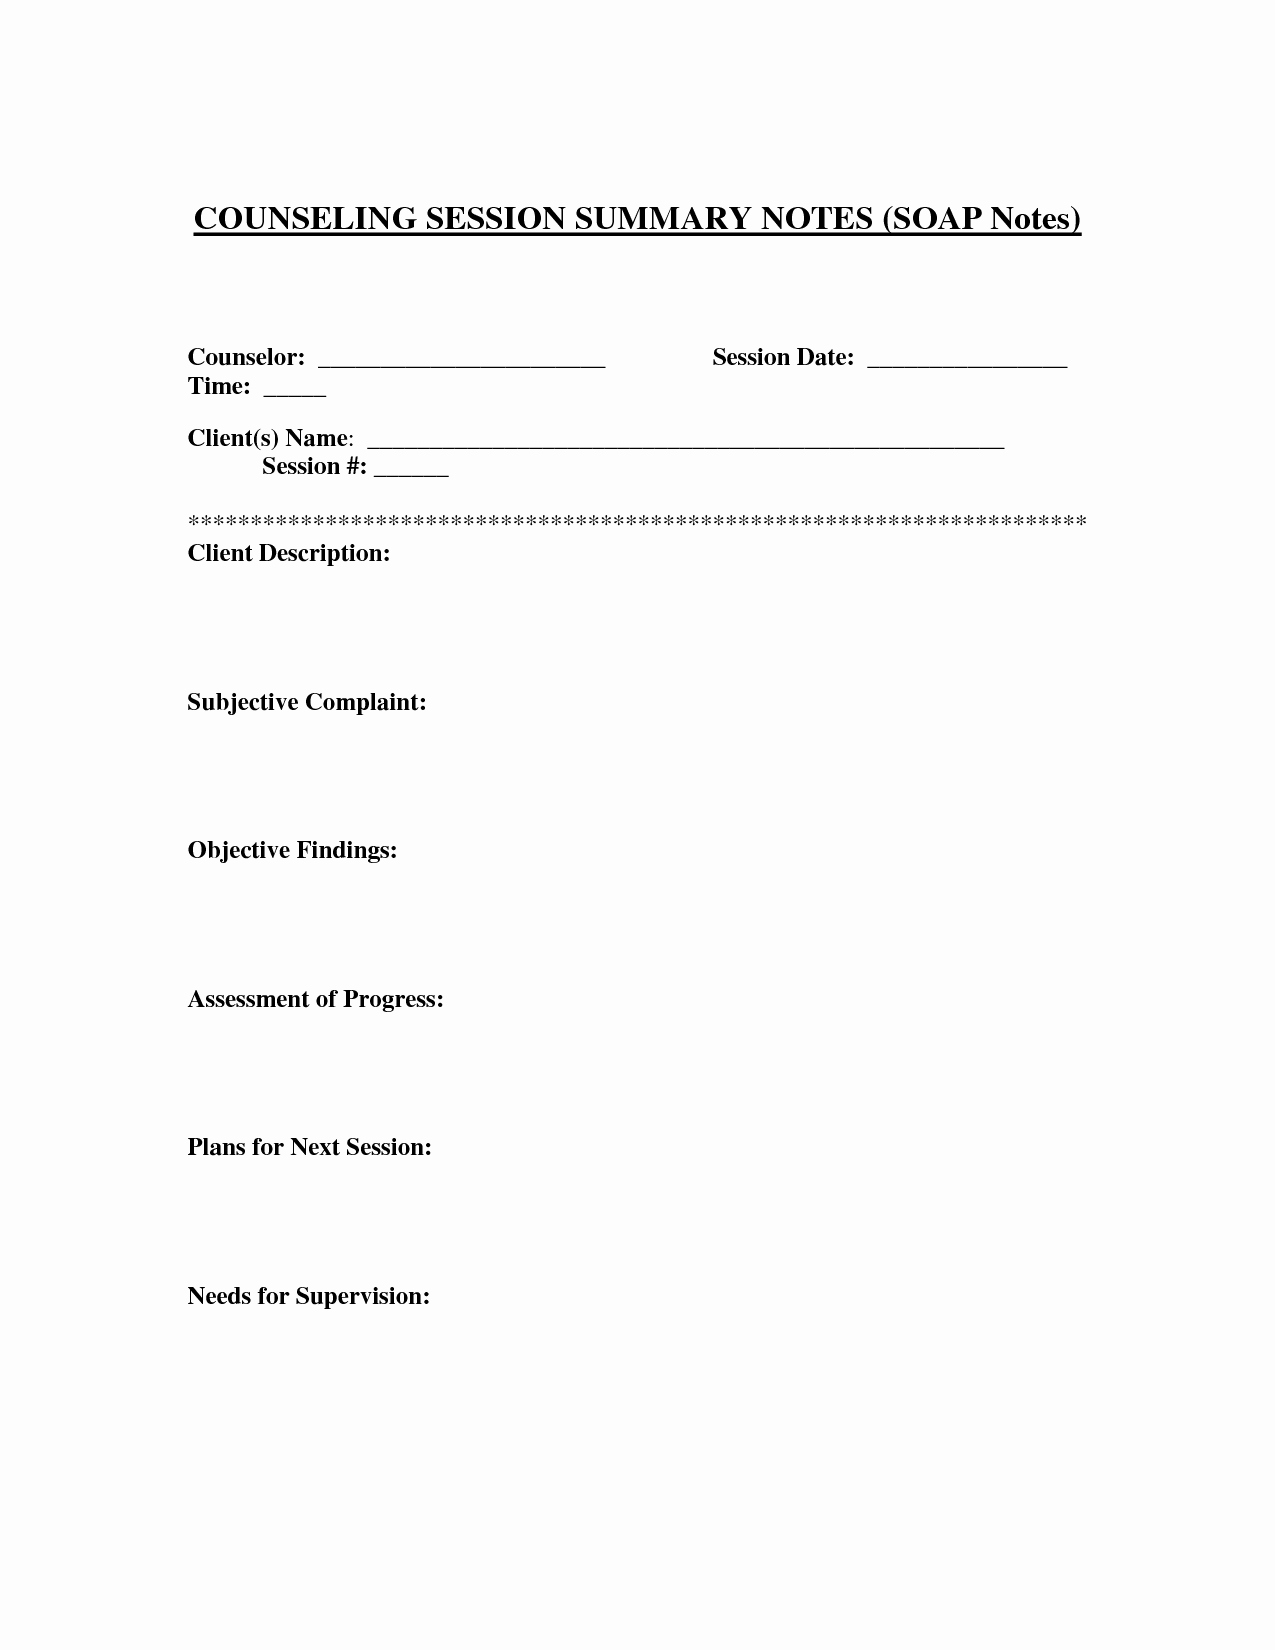 Free soap Note Template Fresh soap Notes Template for Counseling Google Search